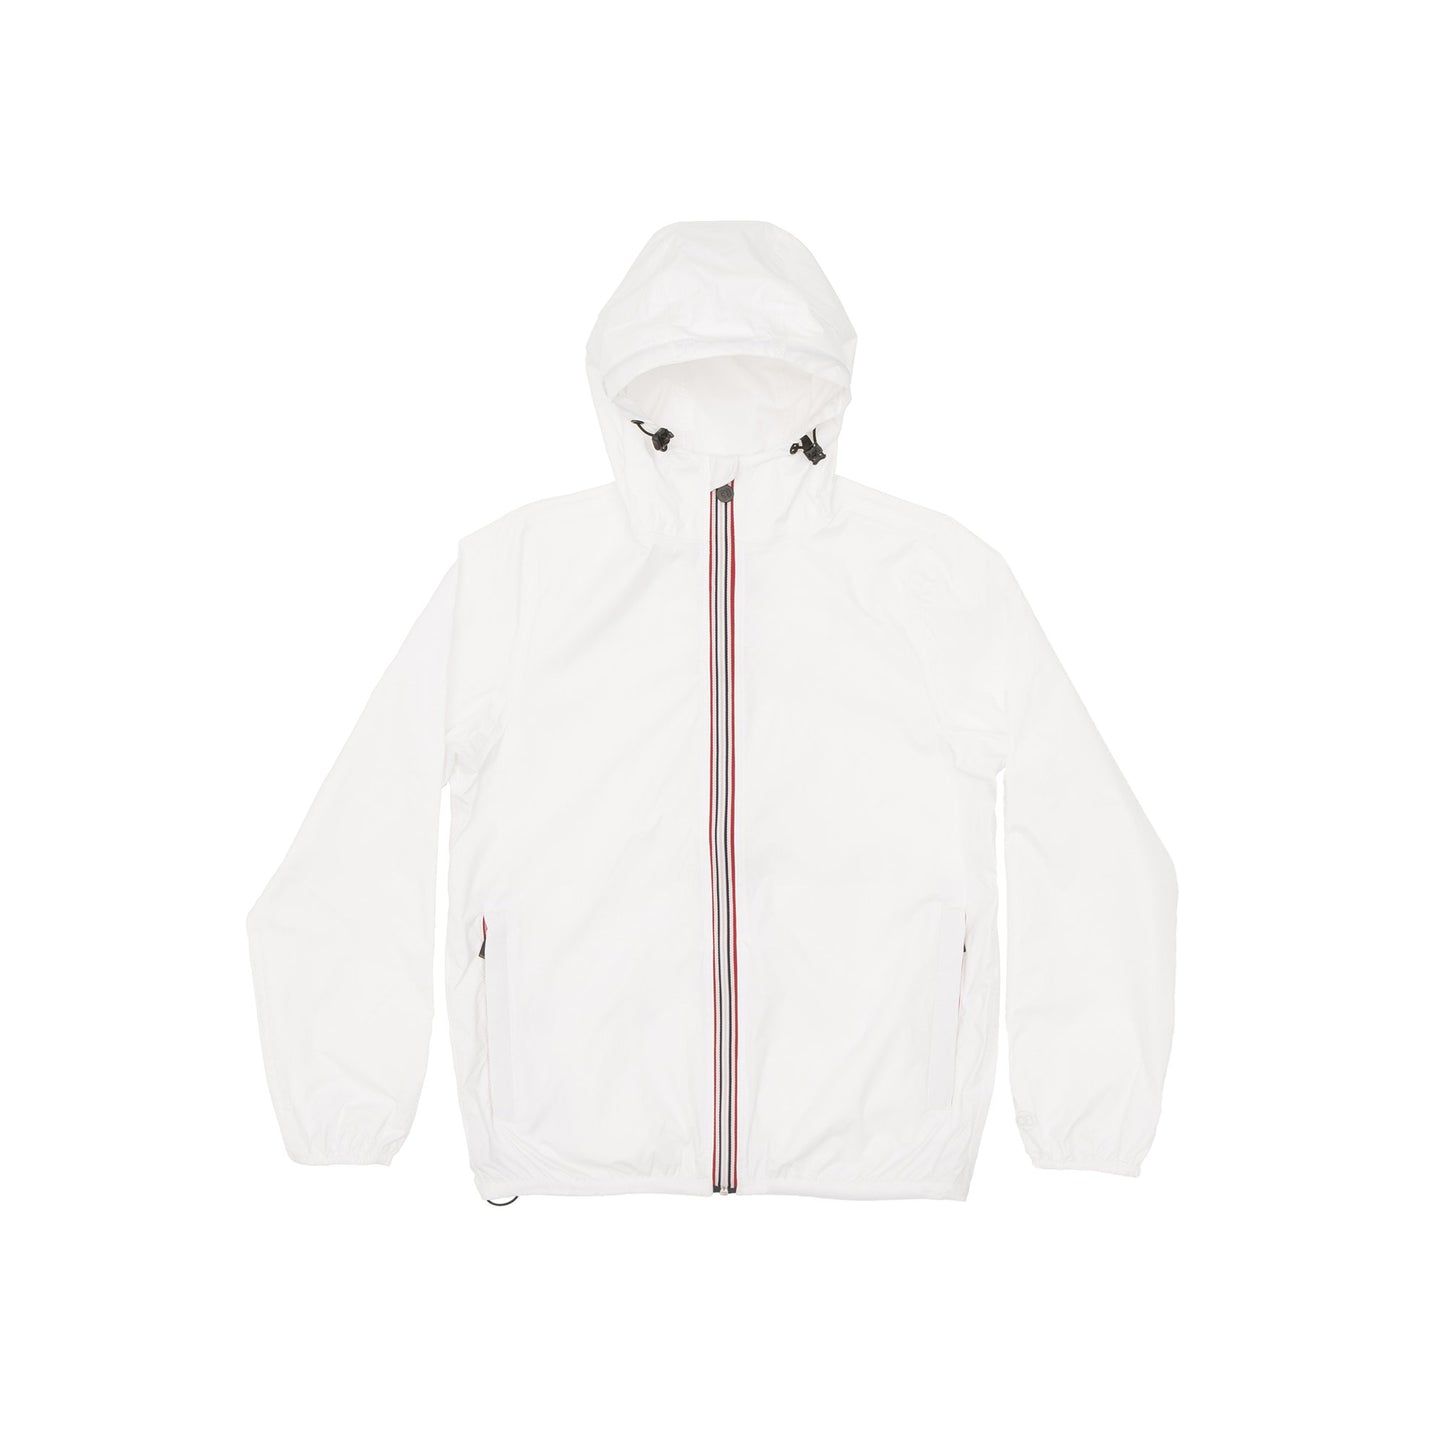 Picture of a Men's Full Zip White Waterproof Rain Jacket product front view on white backdrop